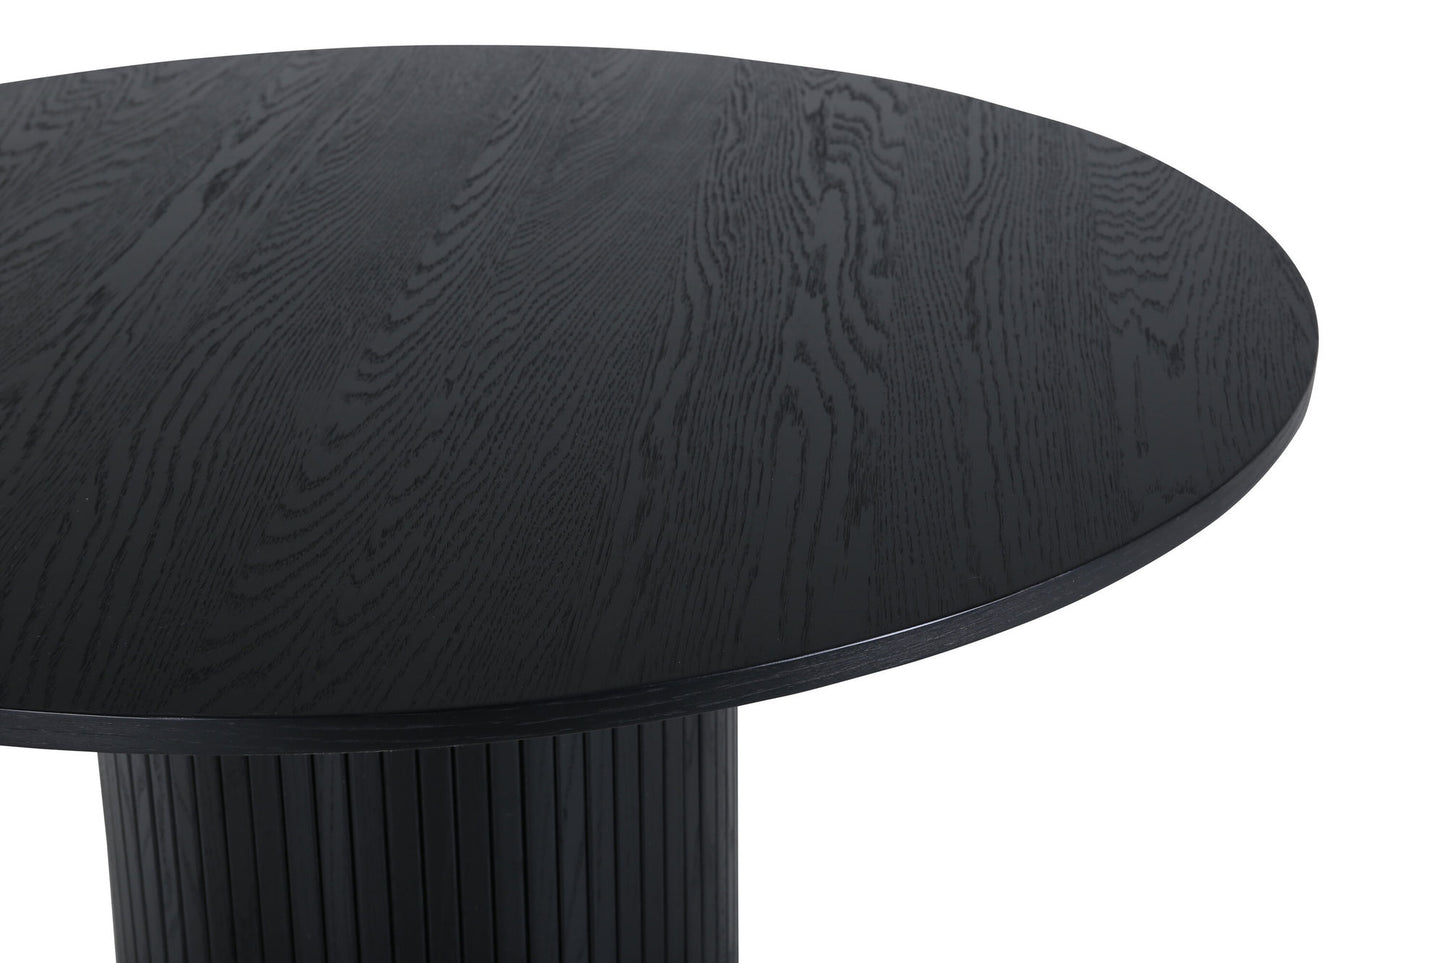 Bianca dining room table round black